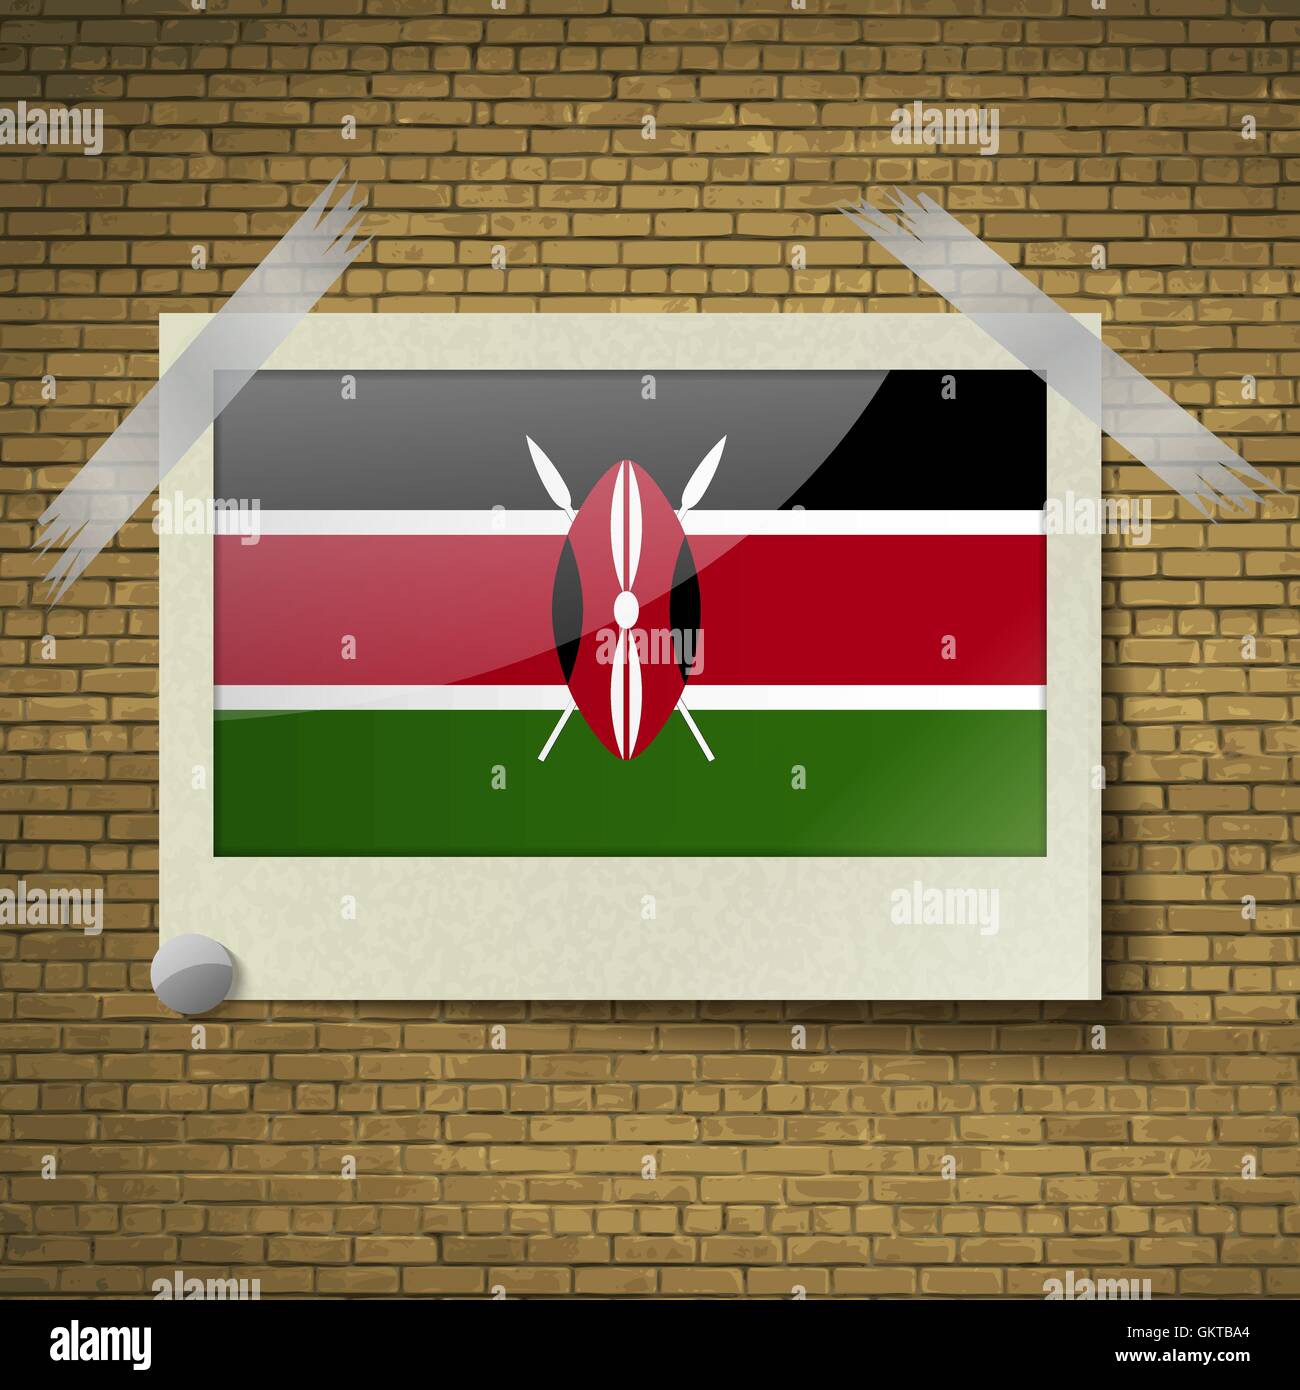 Flags Kenya at frame on a brick background. Vector Stock Vector